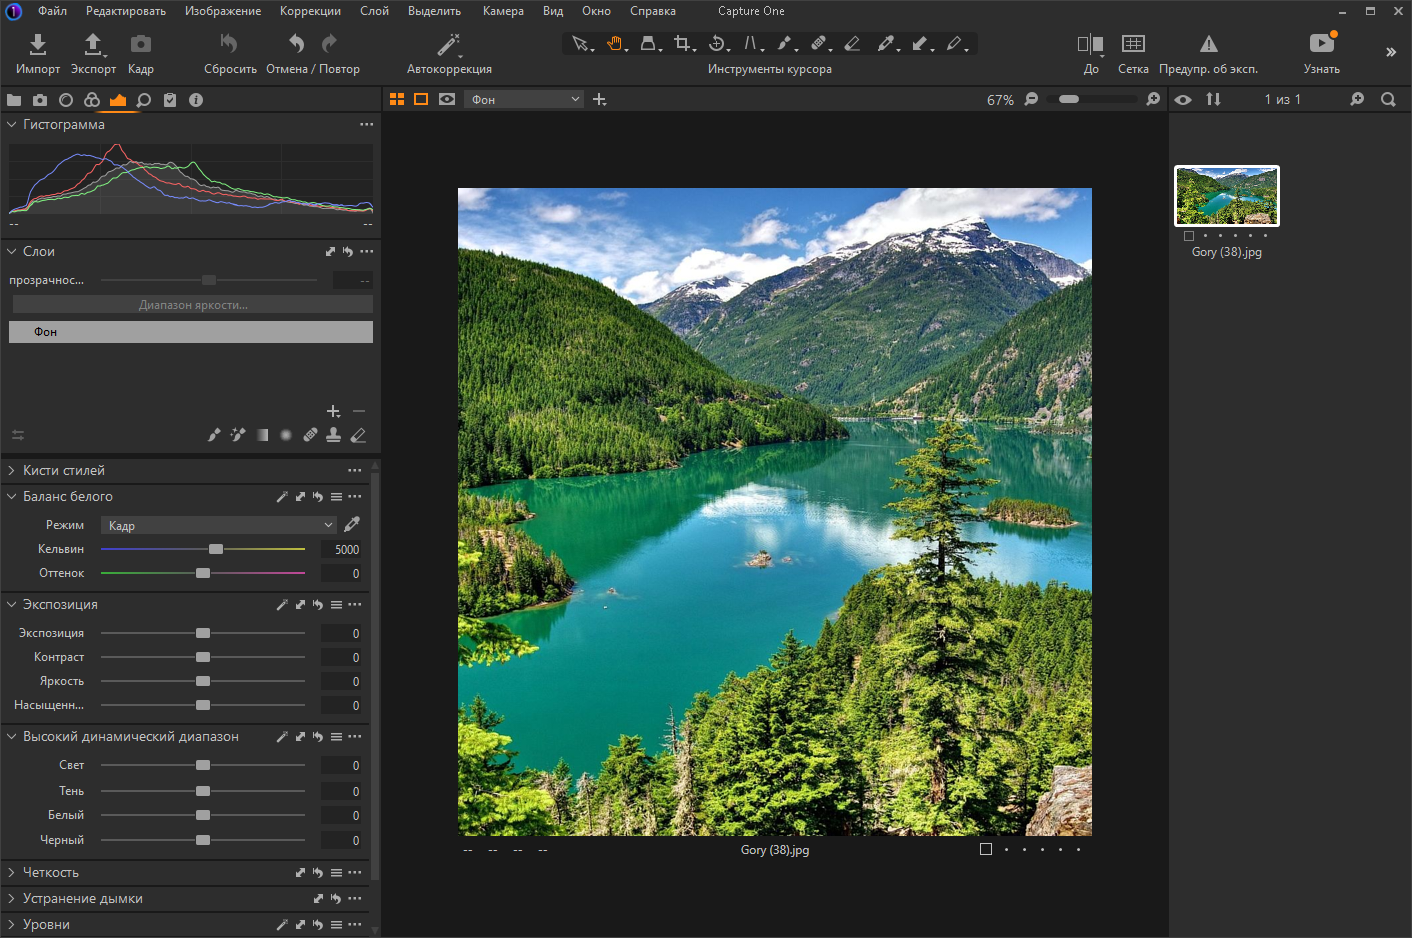 Phase One Capture One Pro 22 15.1.2.3 RePack by KpoJIuK [Multi/Ru]